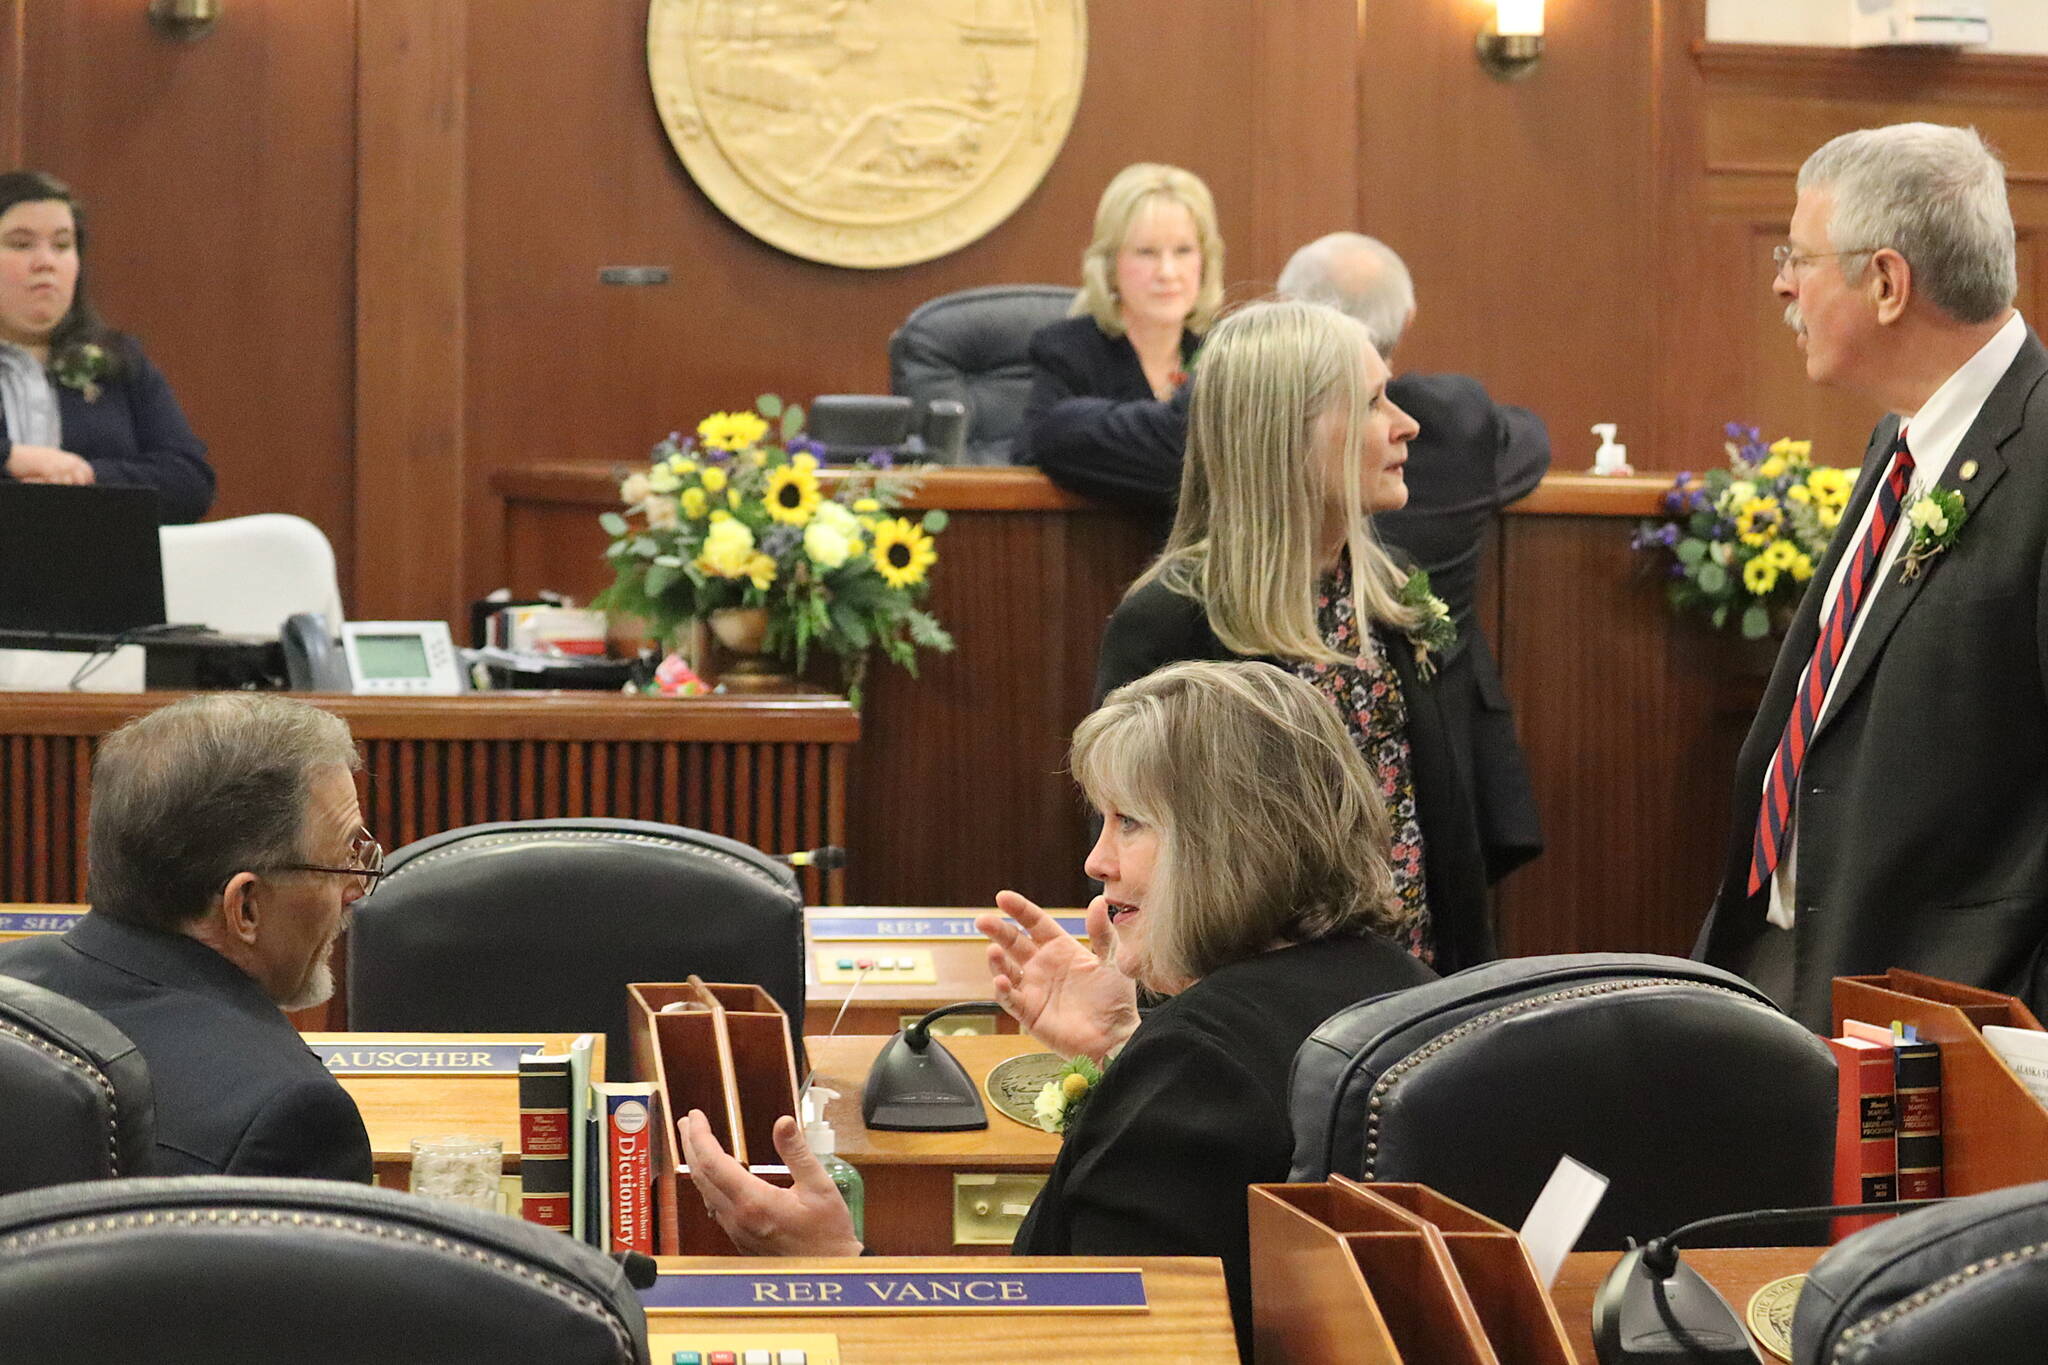 Juneau Democratic state Reps. Sara Hannan, center left, and Andi Story, center right, chat with fellow lawmakers minutes before the House was called to order at 2:05 p.m. Tuesday at the Alaska State Capitol. (Mark Sabbatini / Juneau Empire)